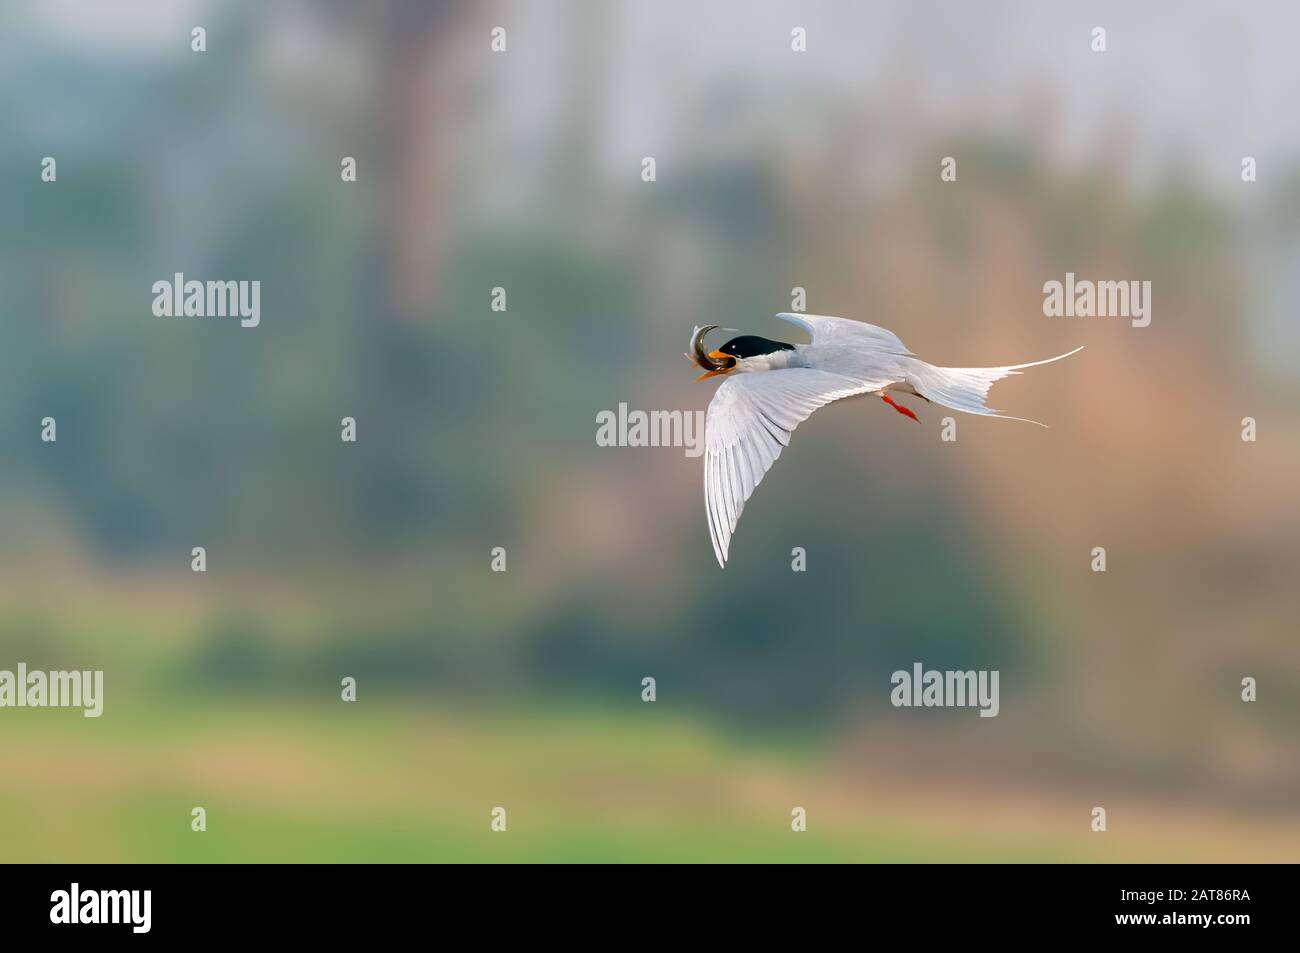 A river tern flying with a fish catch Stock Photo